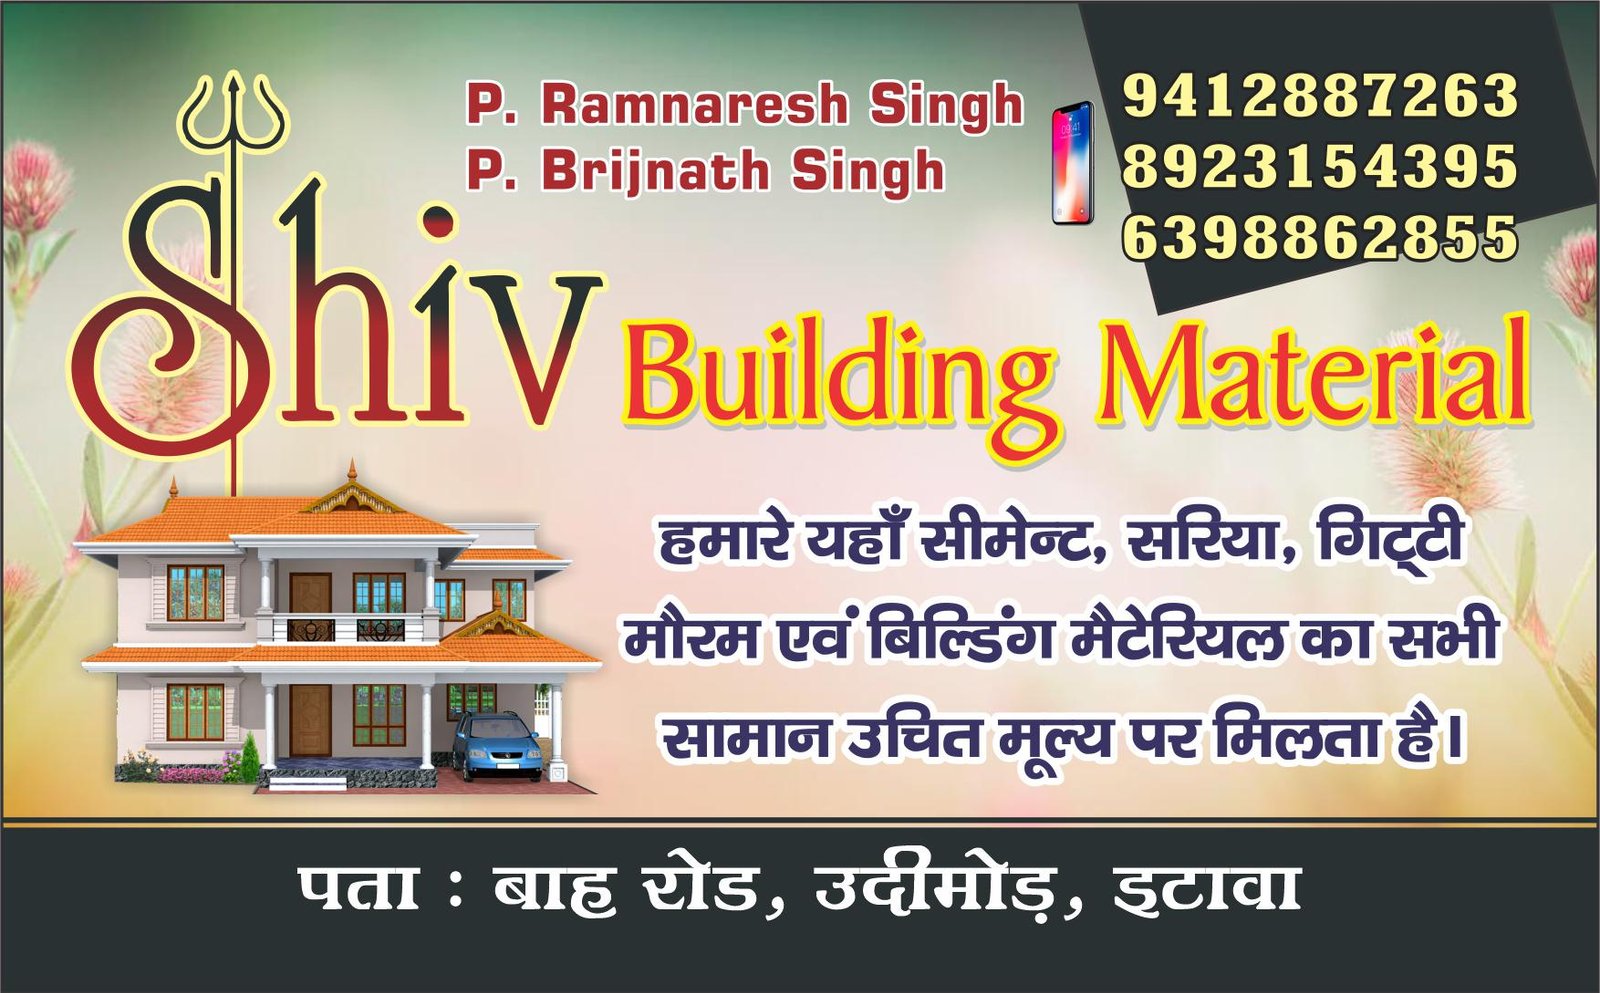 Shiv Building Material Visiting Card